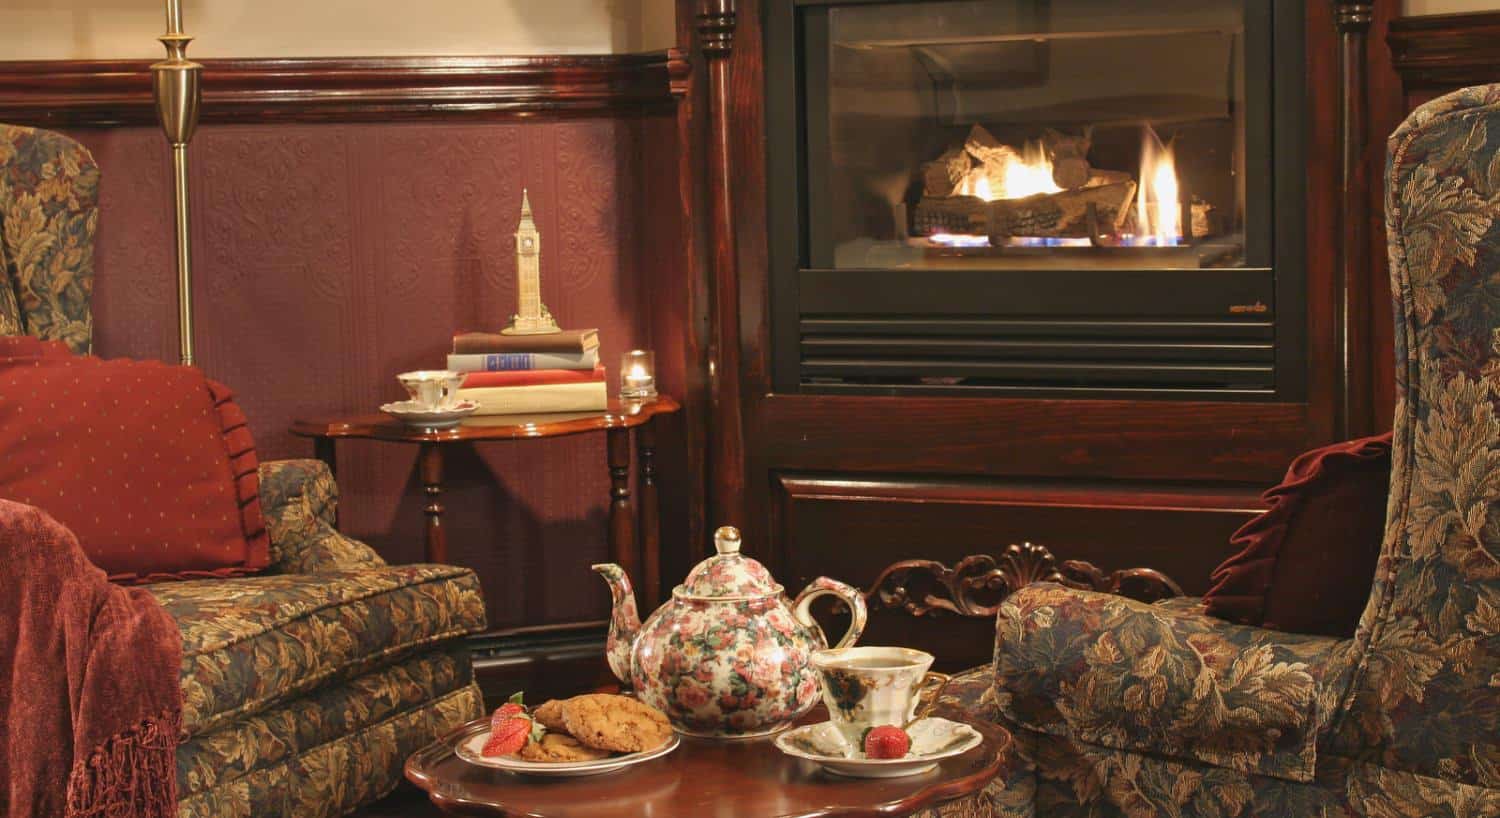 Close up view of sitting area with dark floral upholstered arm chairs, dark wooden coffee table, antique tea pot, tea cup and saucer, plate of cookies, and a fireplace